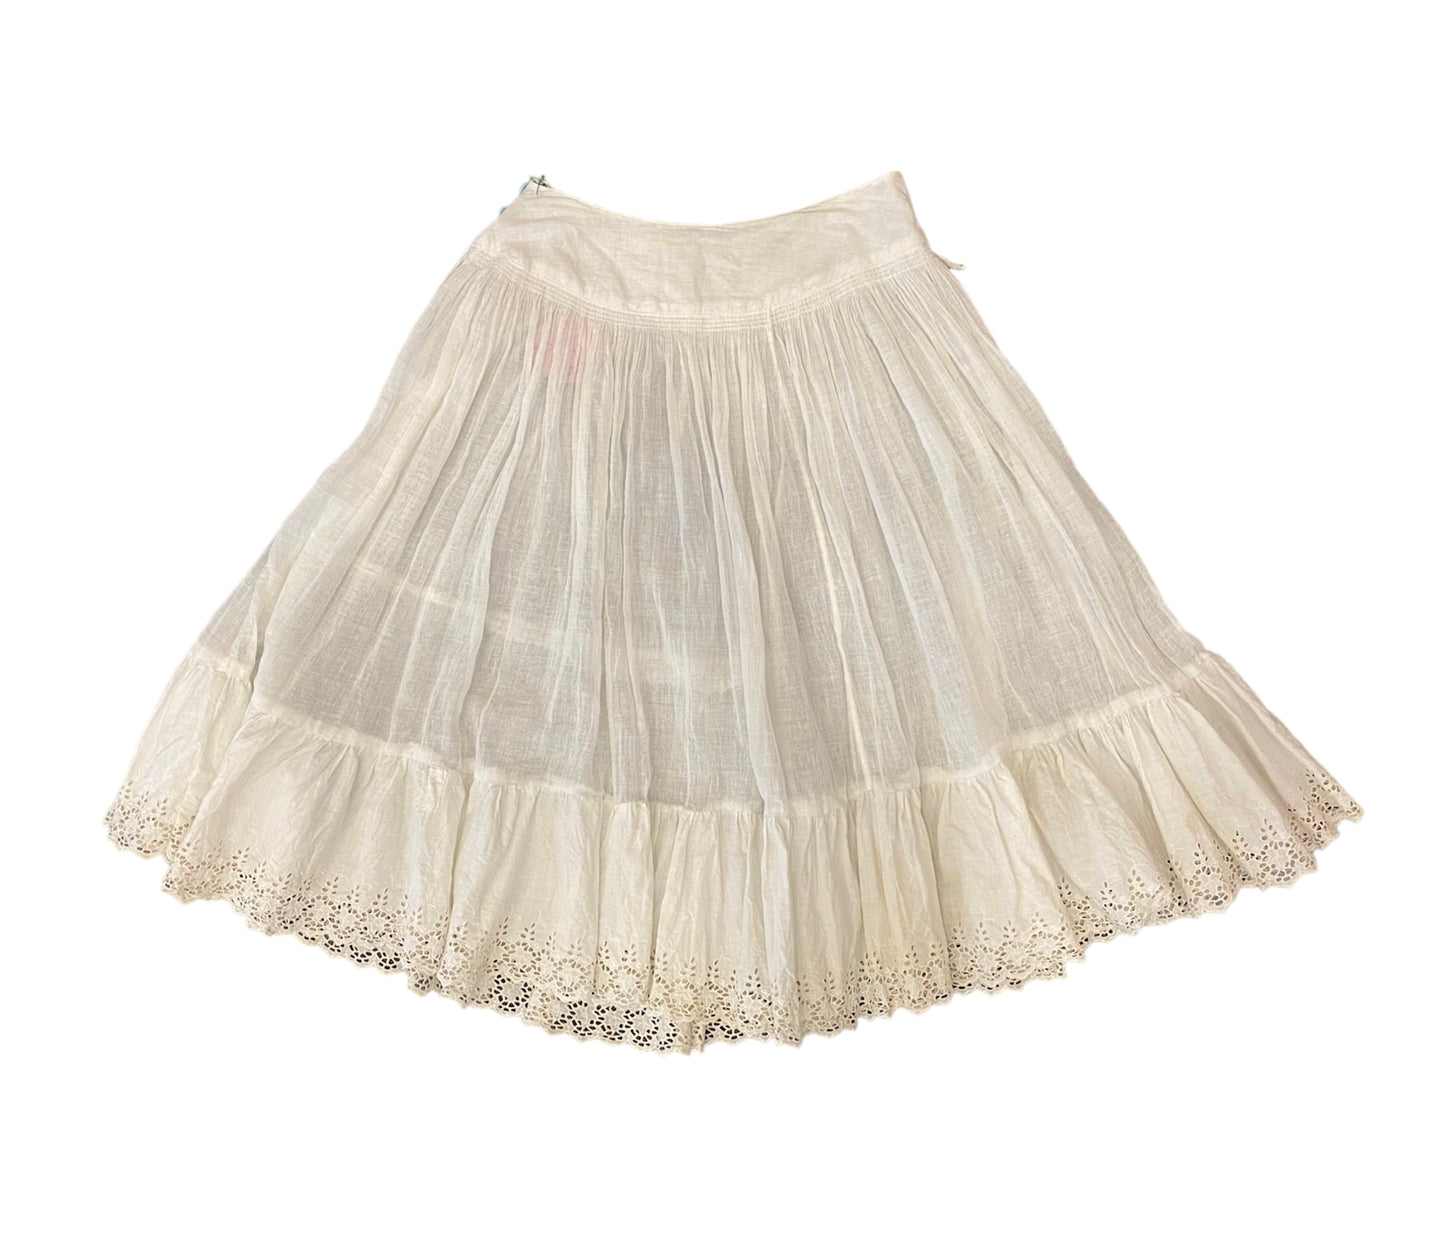 Antique Cotton Gauze Skirt As-Is